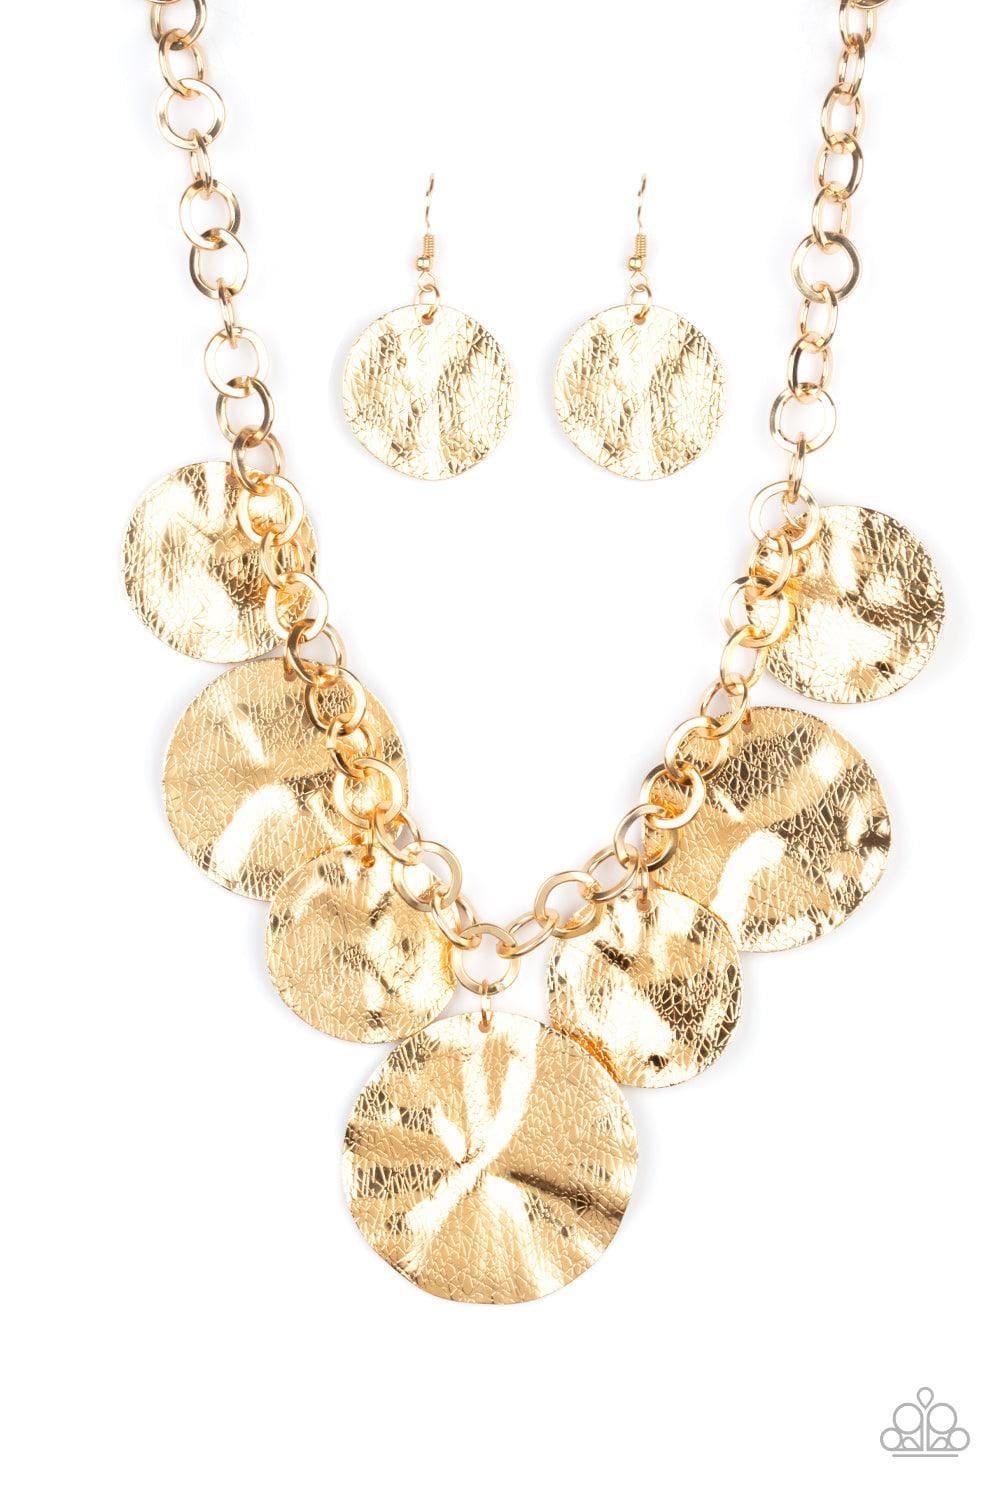 Paparazzi Accessories - Barely Scratched The Surface - Gold Necklace - Bling by JessieK